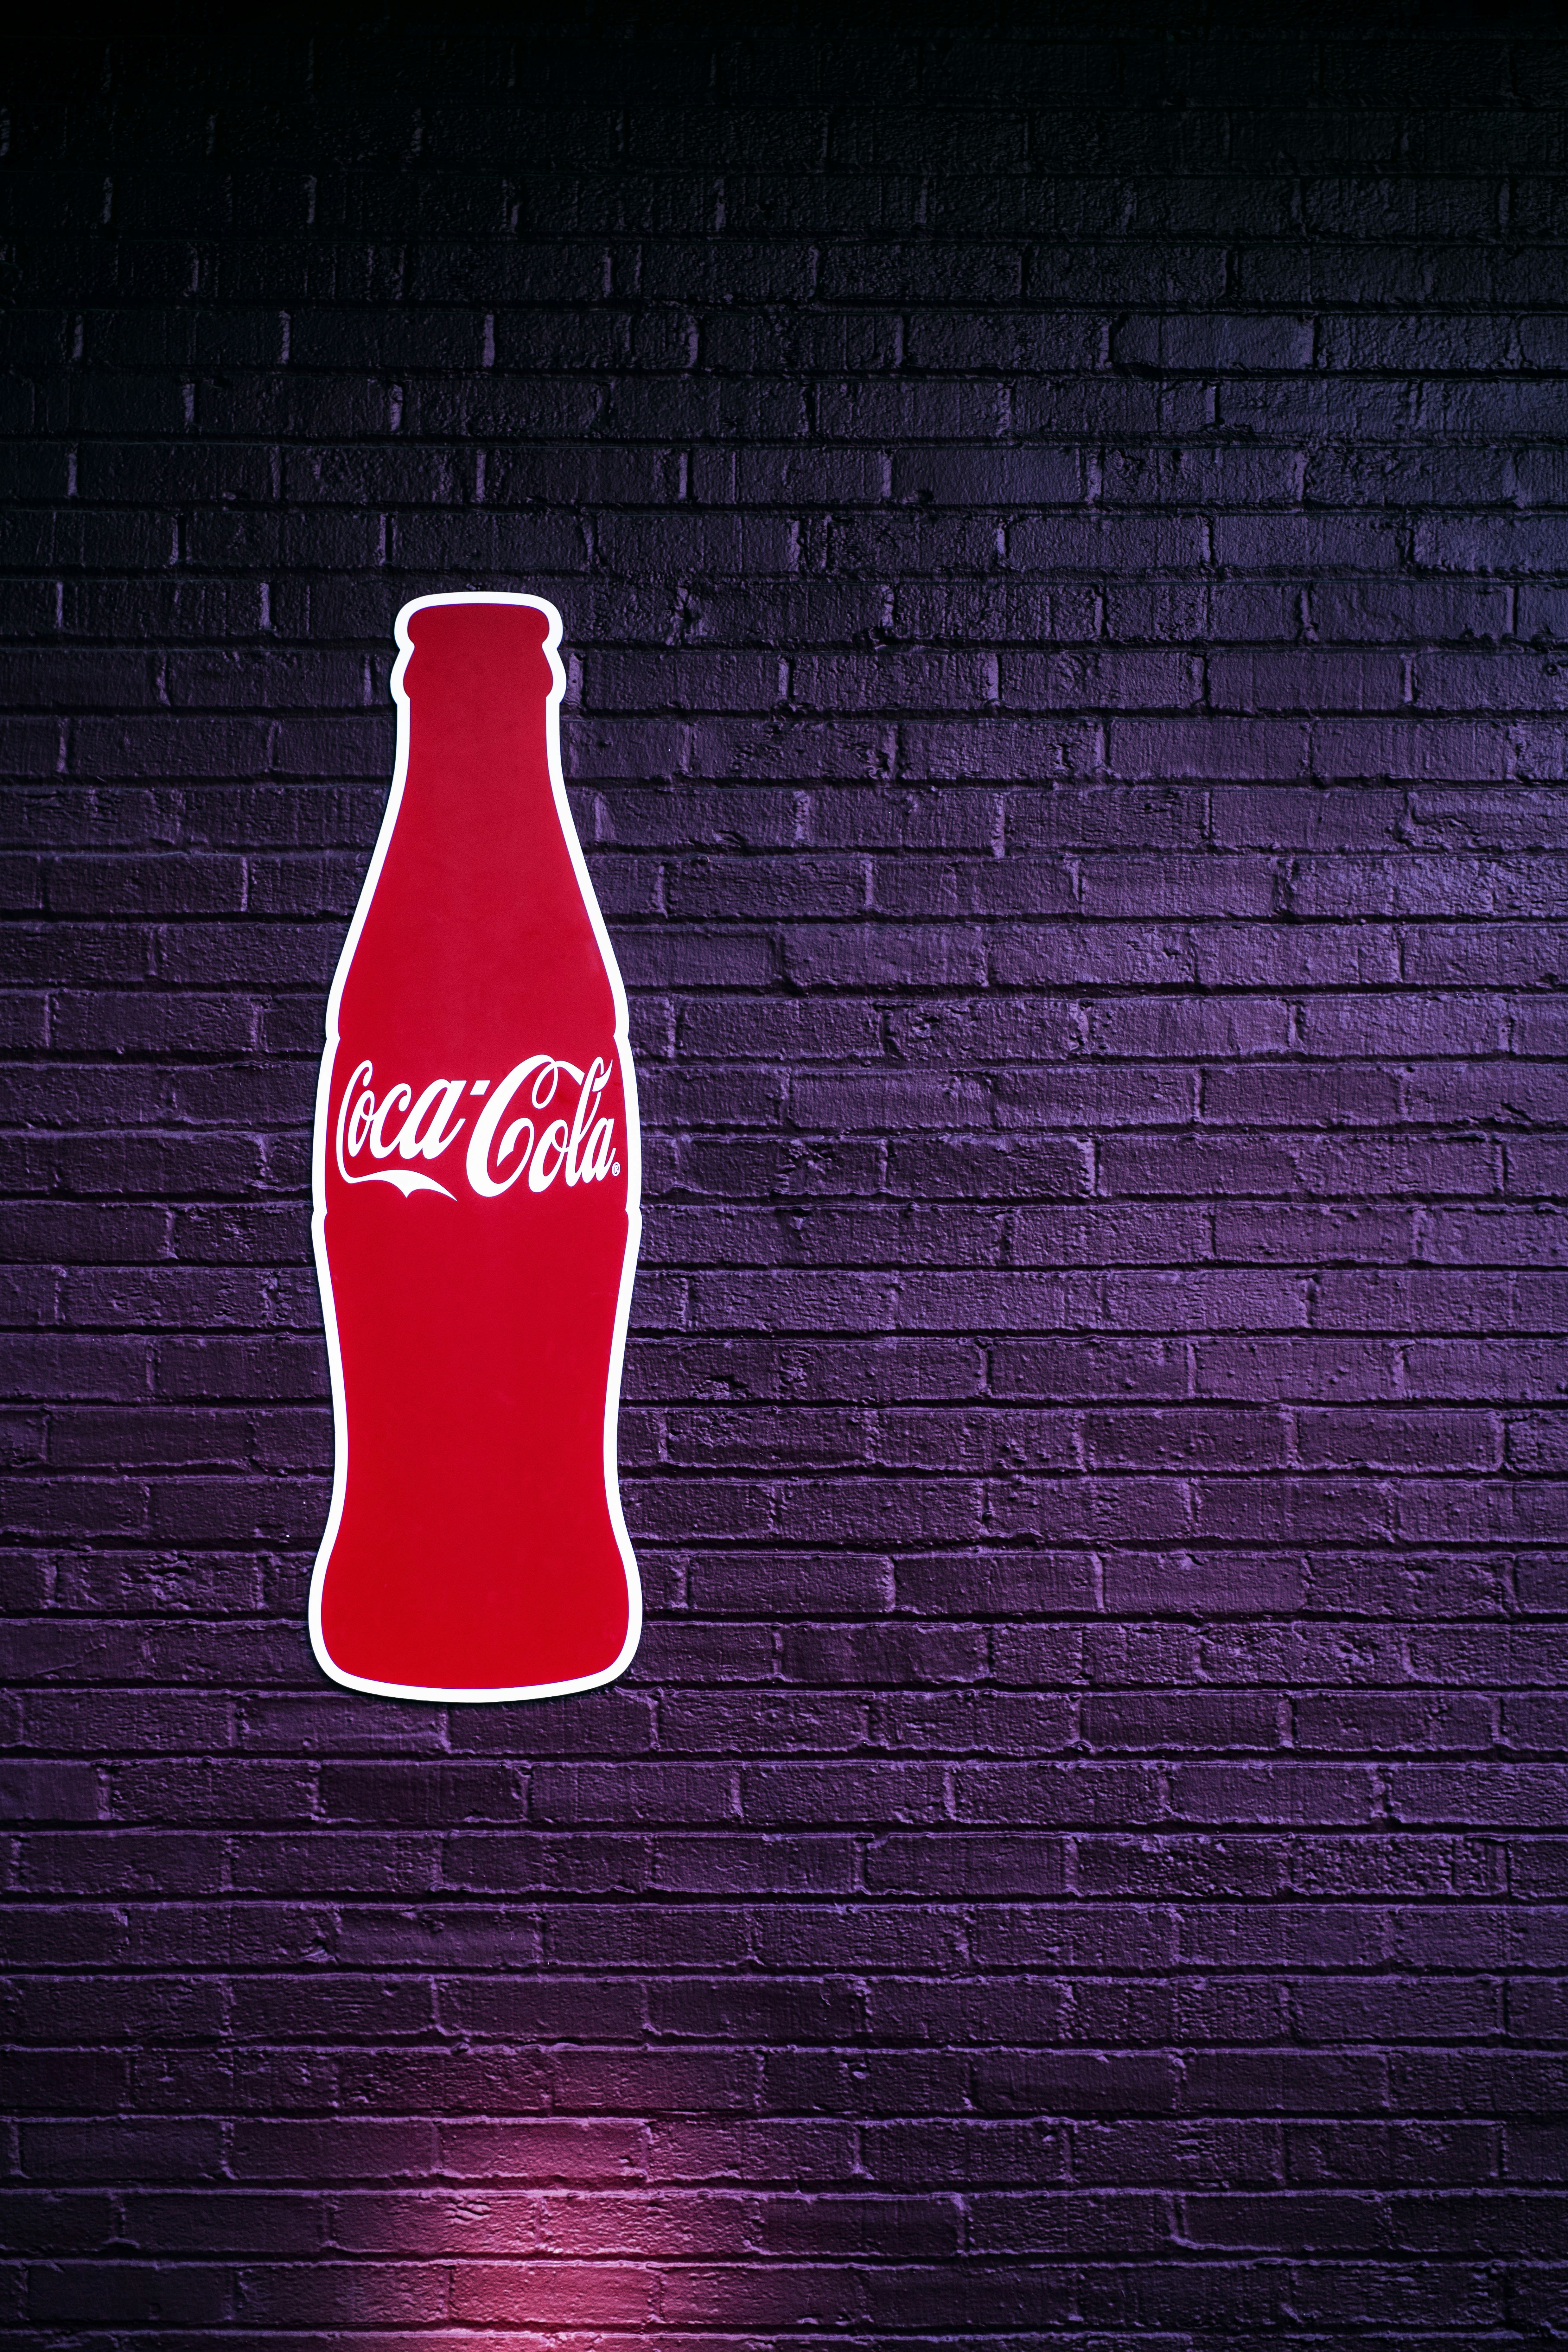 red coca cola bottle on black and white striped wall